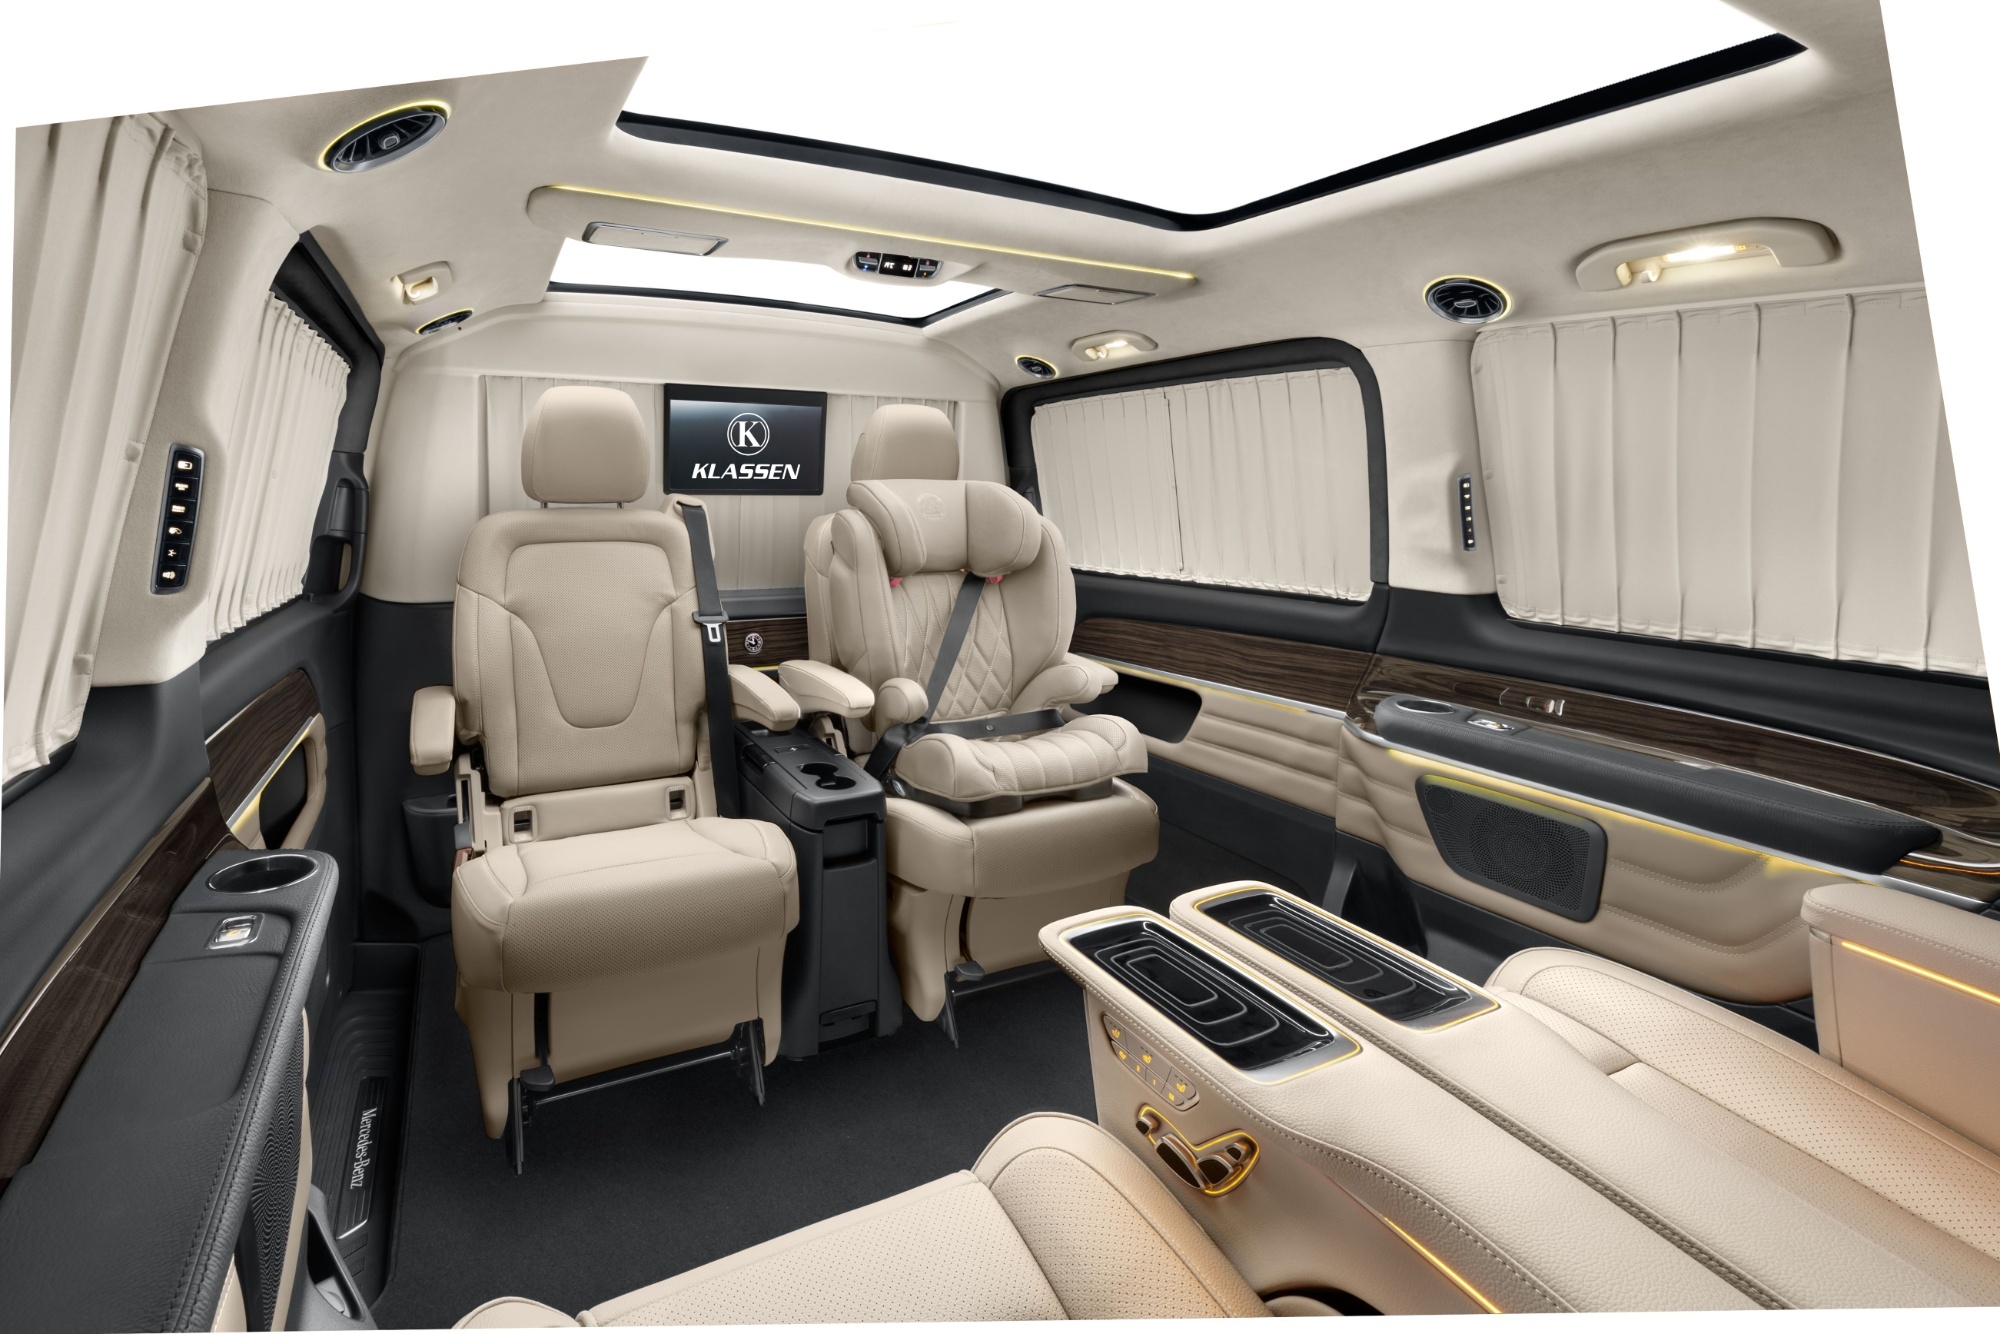 The Mercedes-Benz V-Class combines comfort and luxury on a large